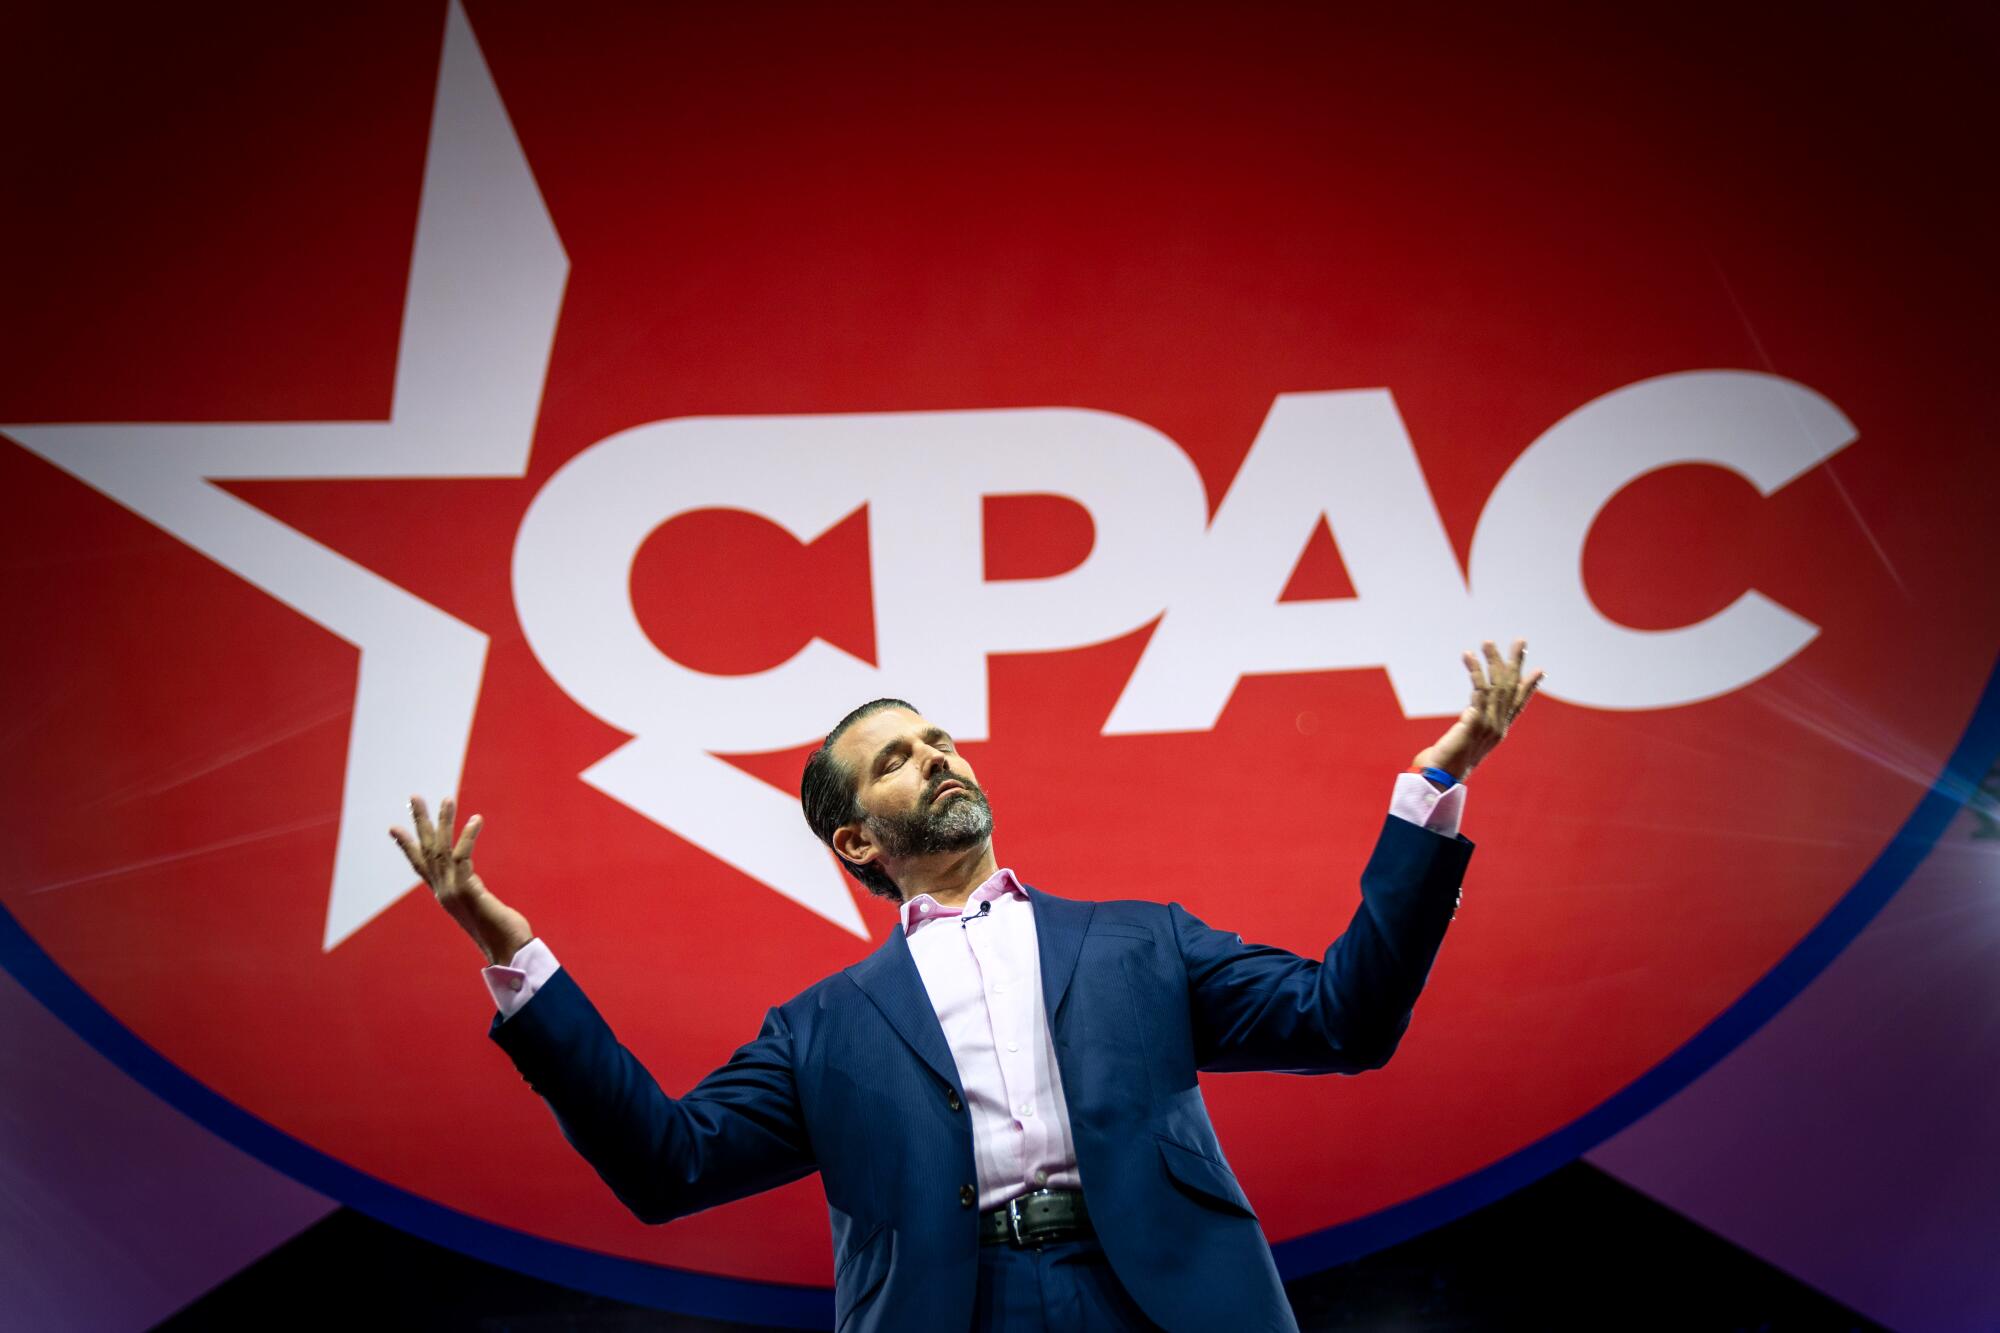 Donald Trump Jr., speaks on stage  while white-on-red sign CPAC is displayed behind him.